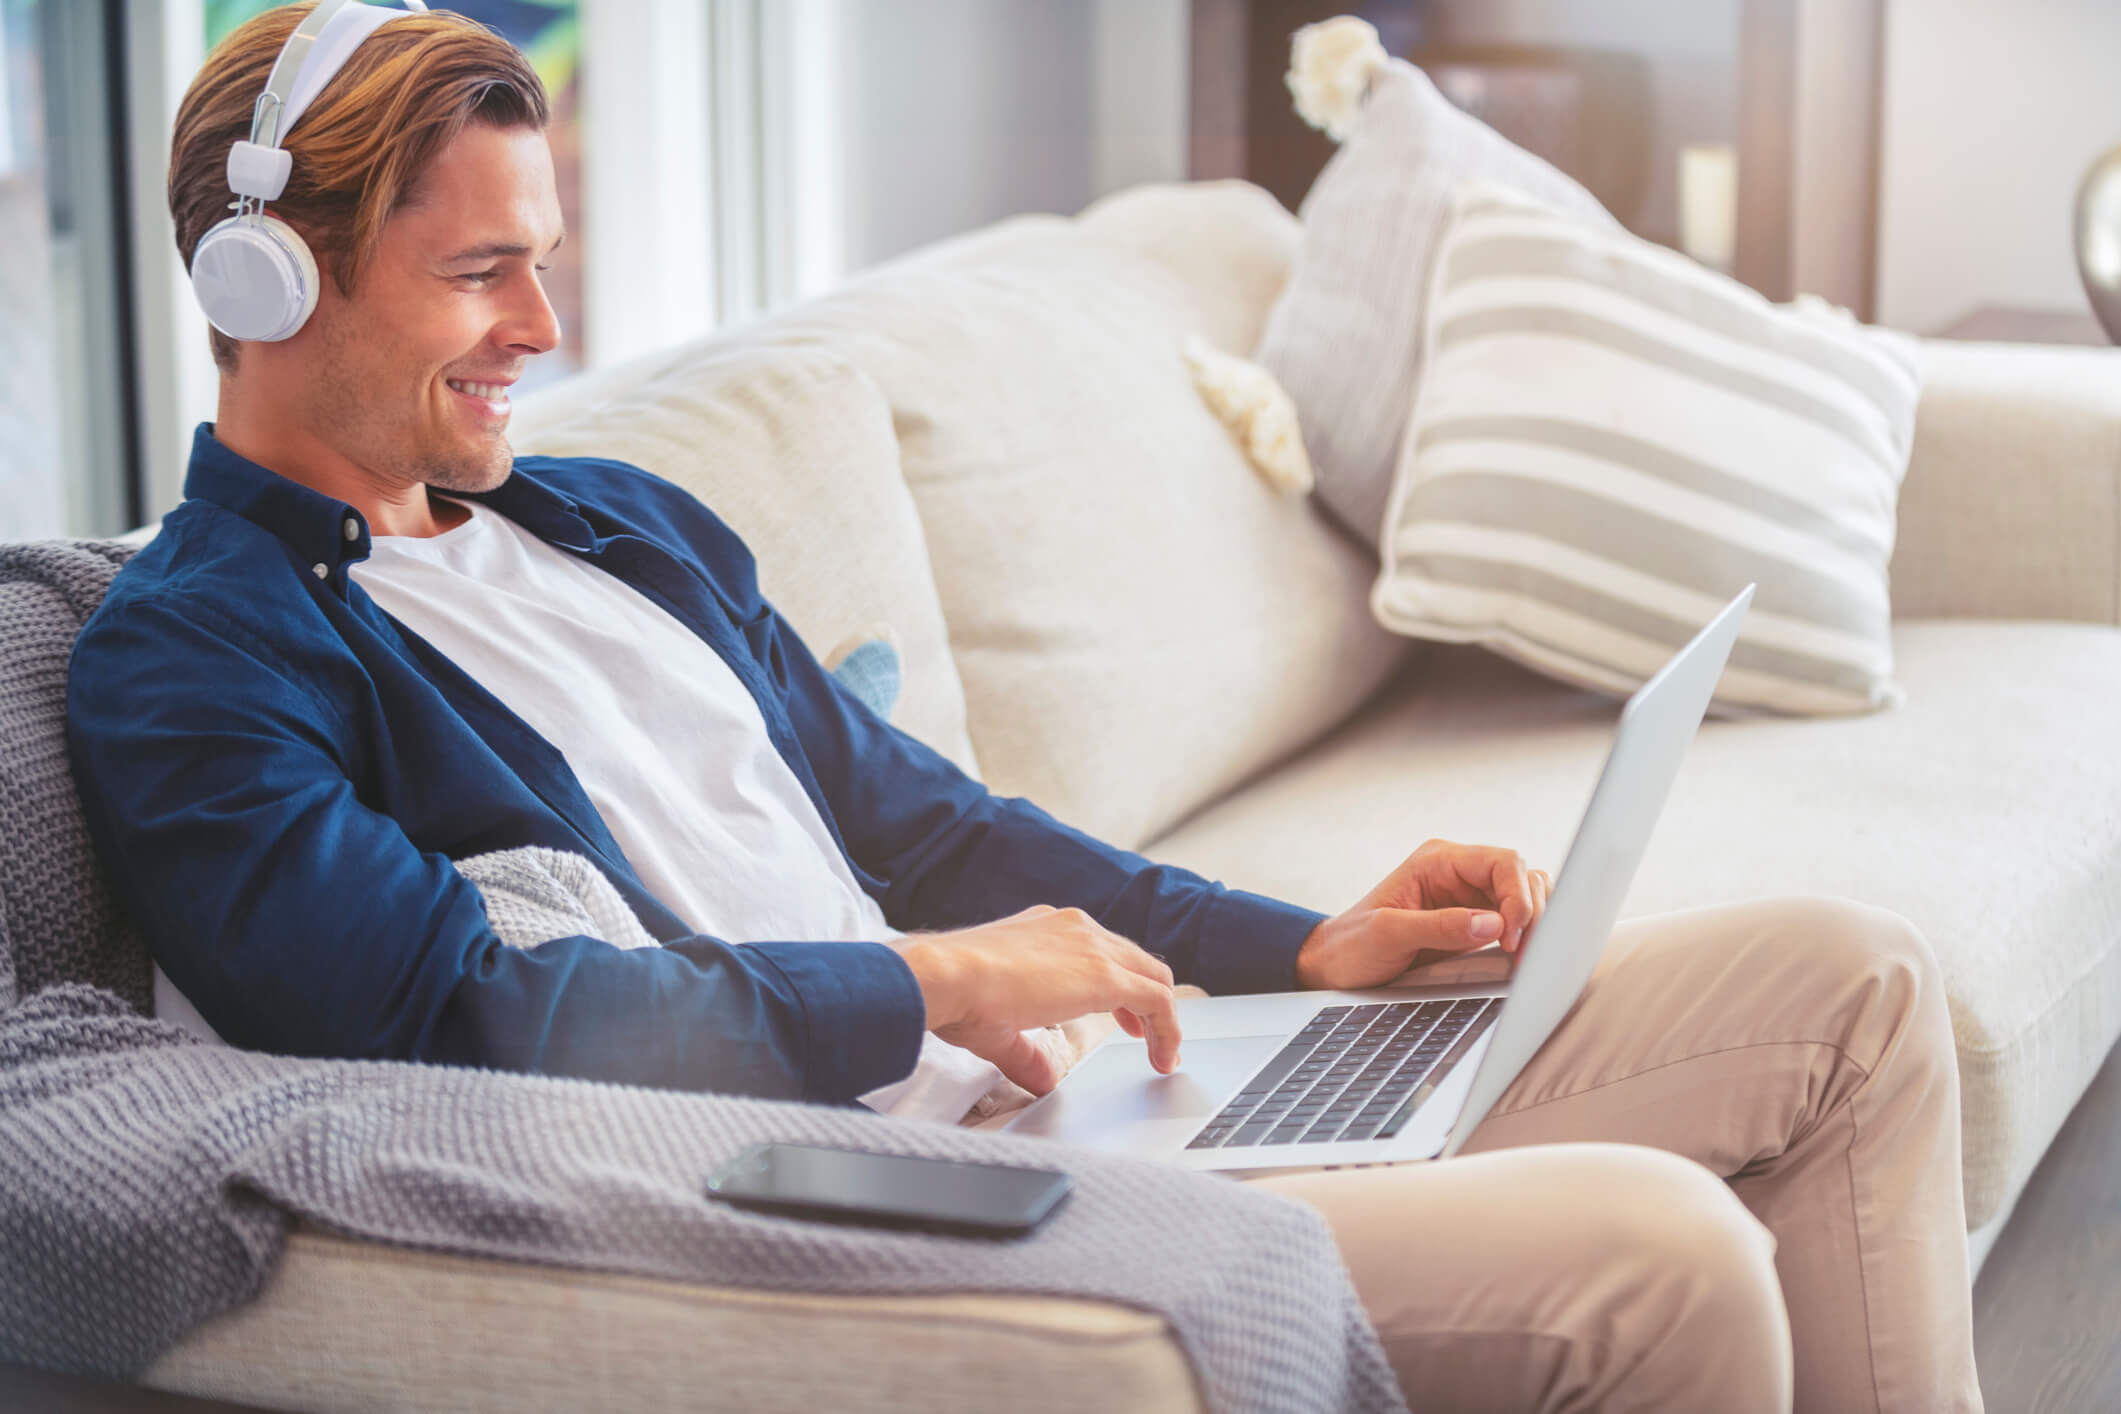 A man wearing headphones is sitting on a couch and using a laptop that is on his legs; he is smiling.